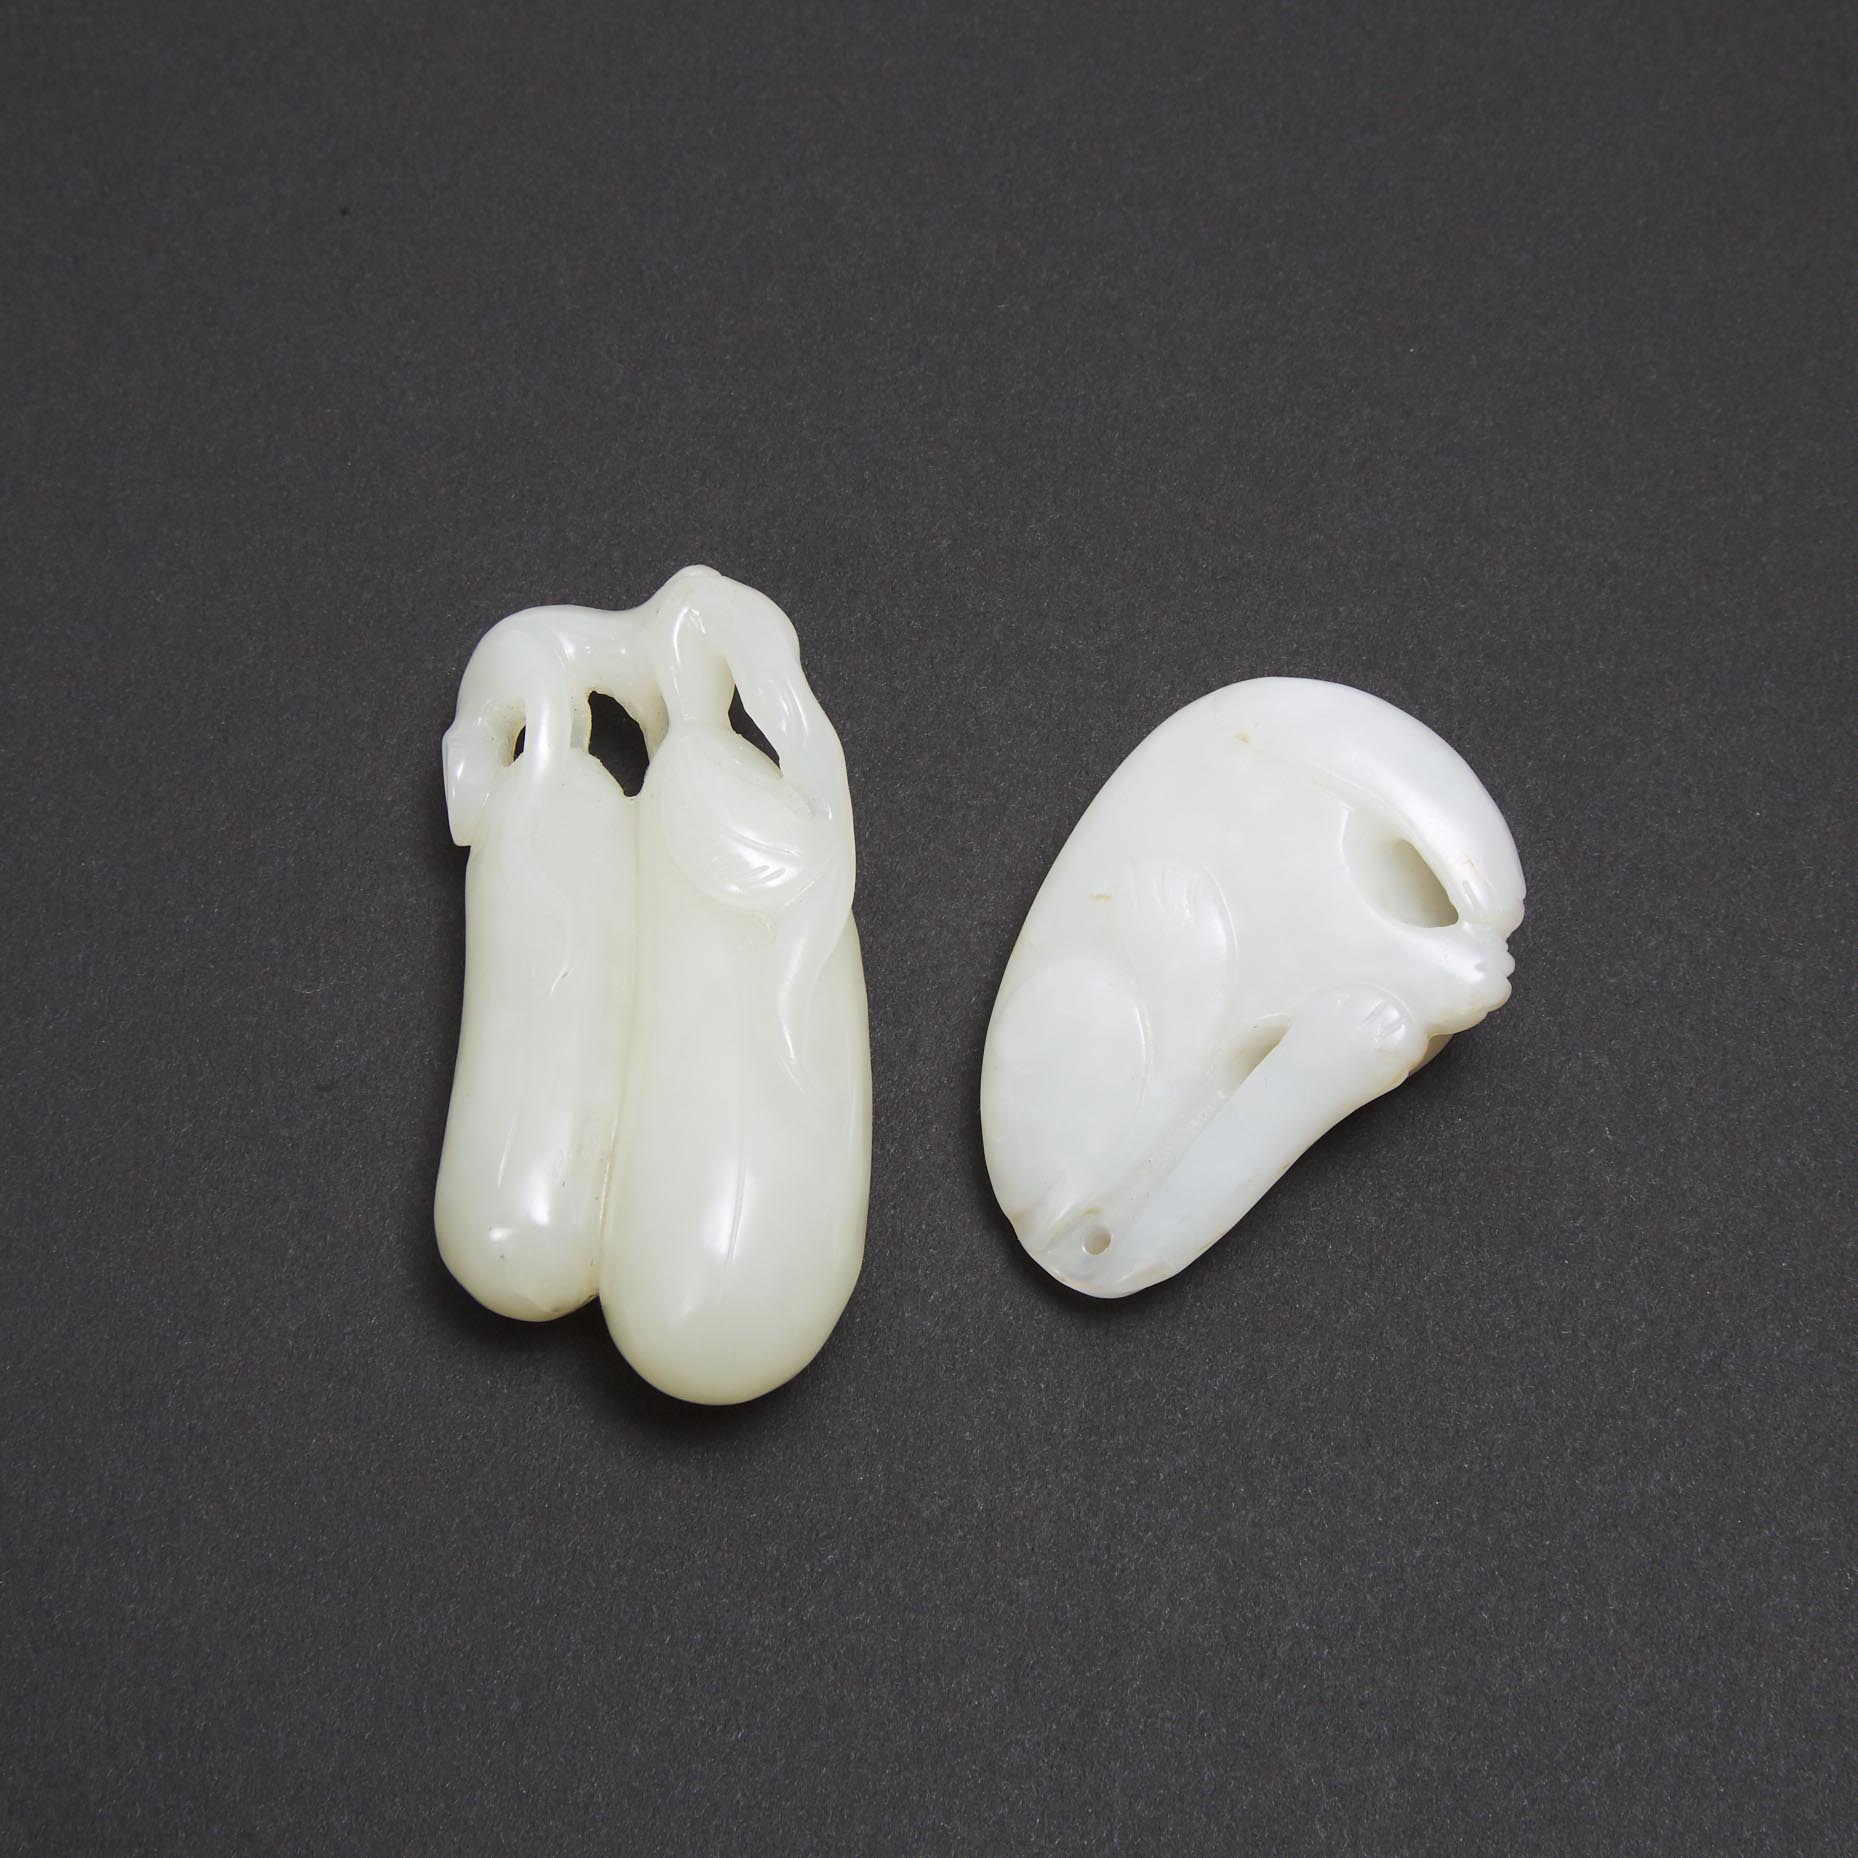 A White Jade ‘Double-Melon’ Carving, together with a White Jade Cat Pendant, 19th/20th Century